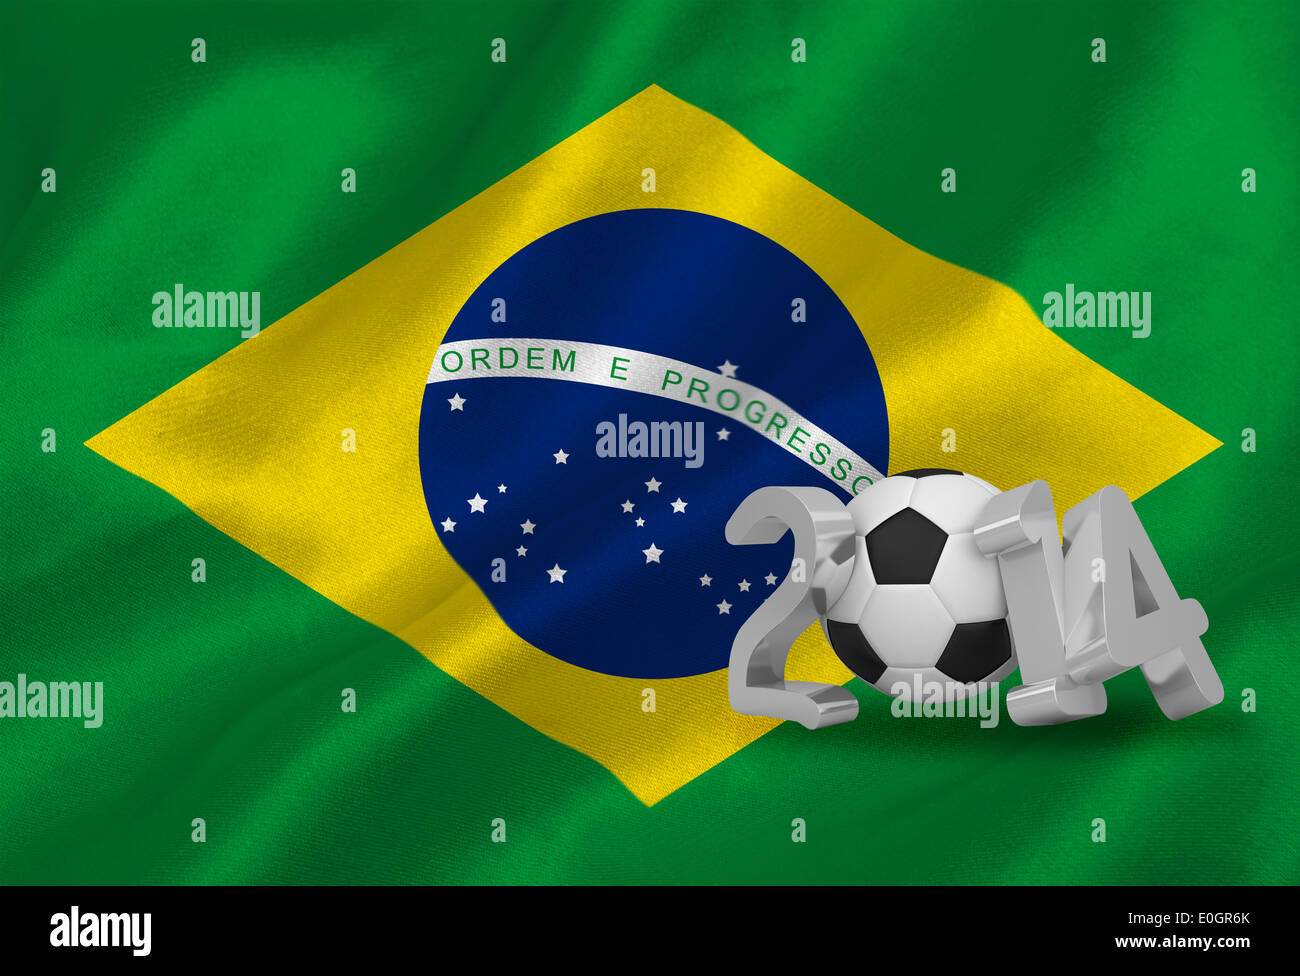 World cup 2014 with brasil flag Stock Photo